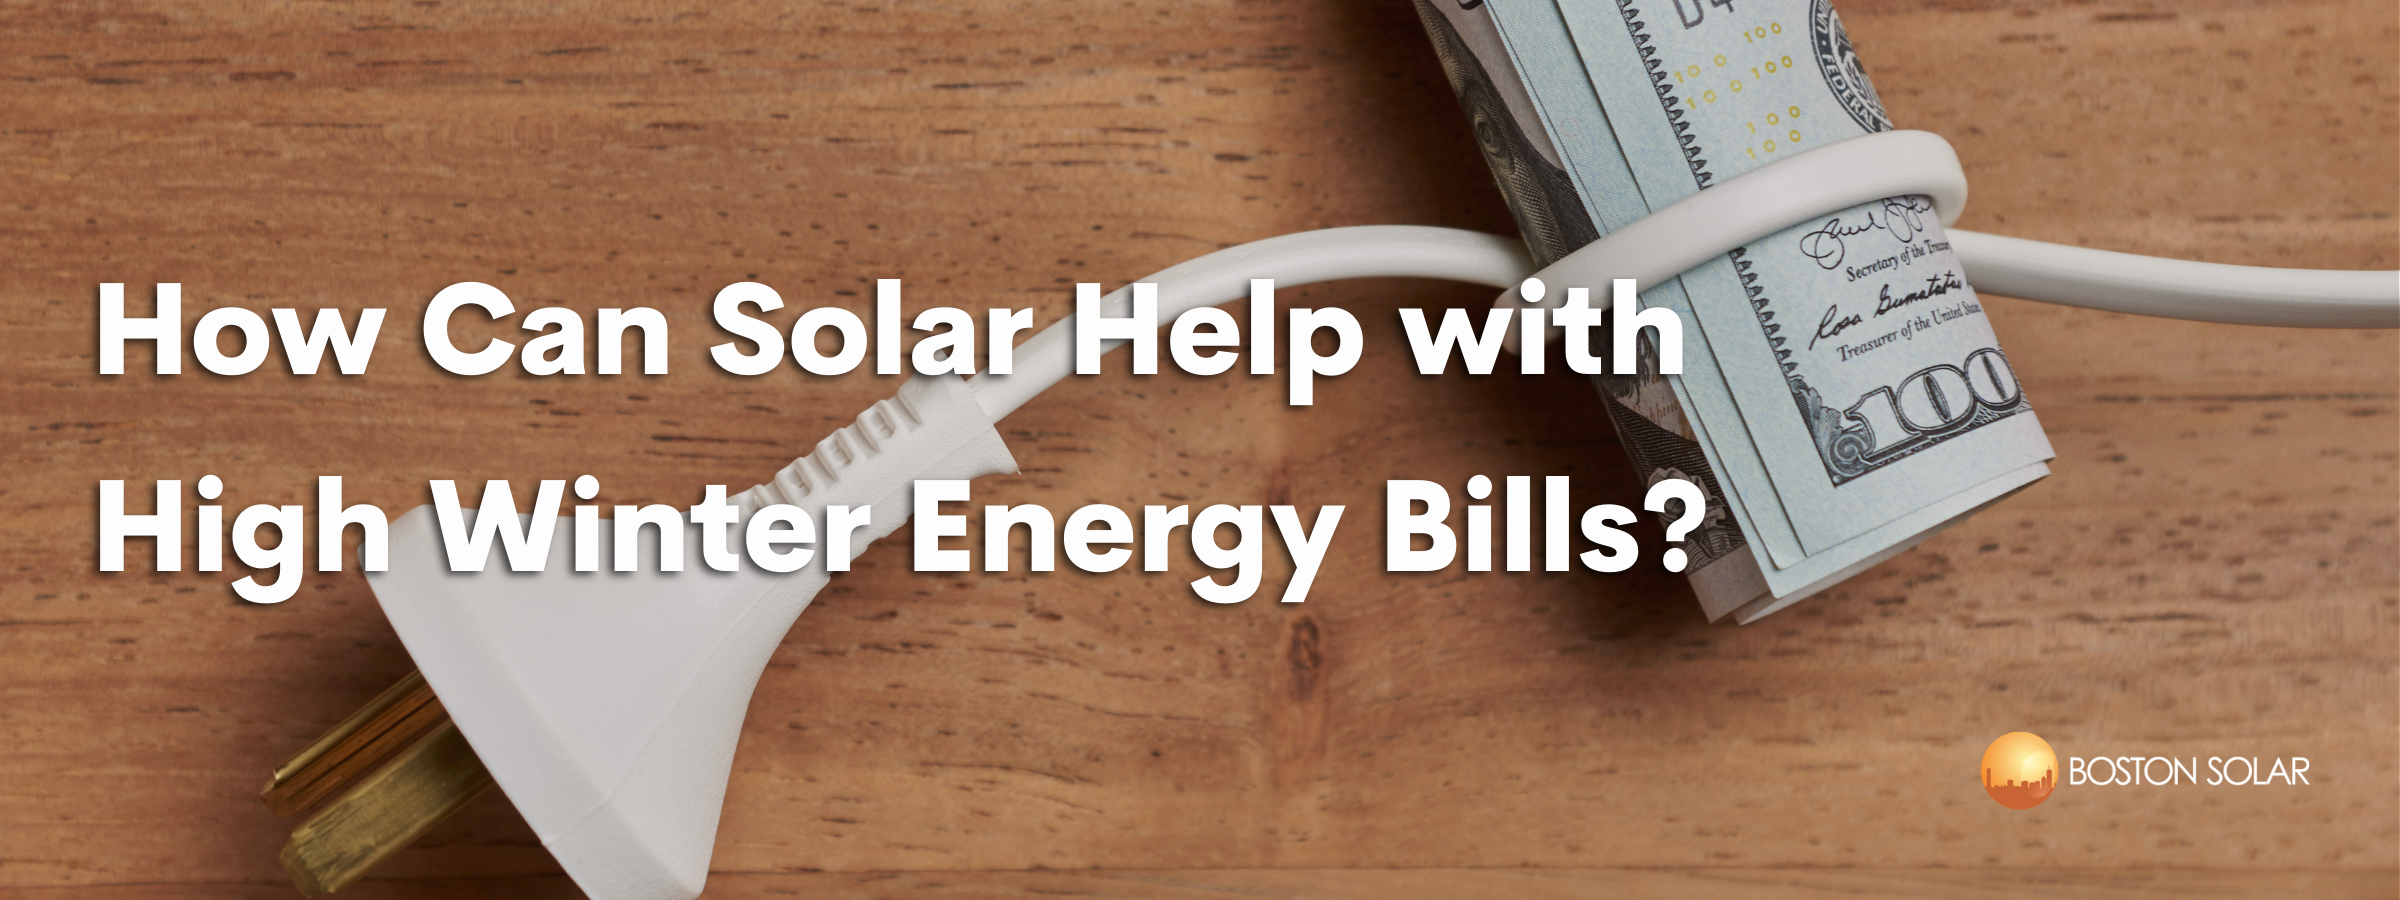 How Can Solar Help with High Winter Energy Bills?